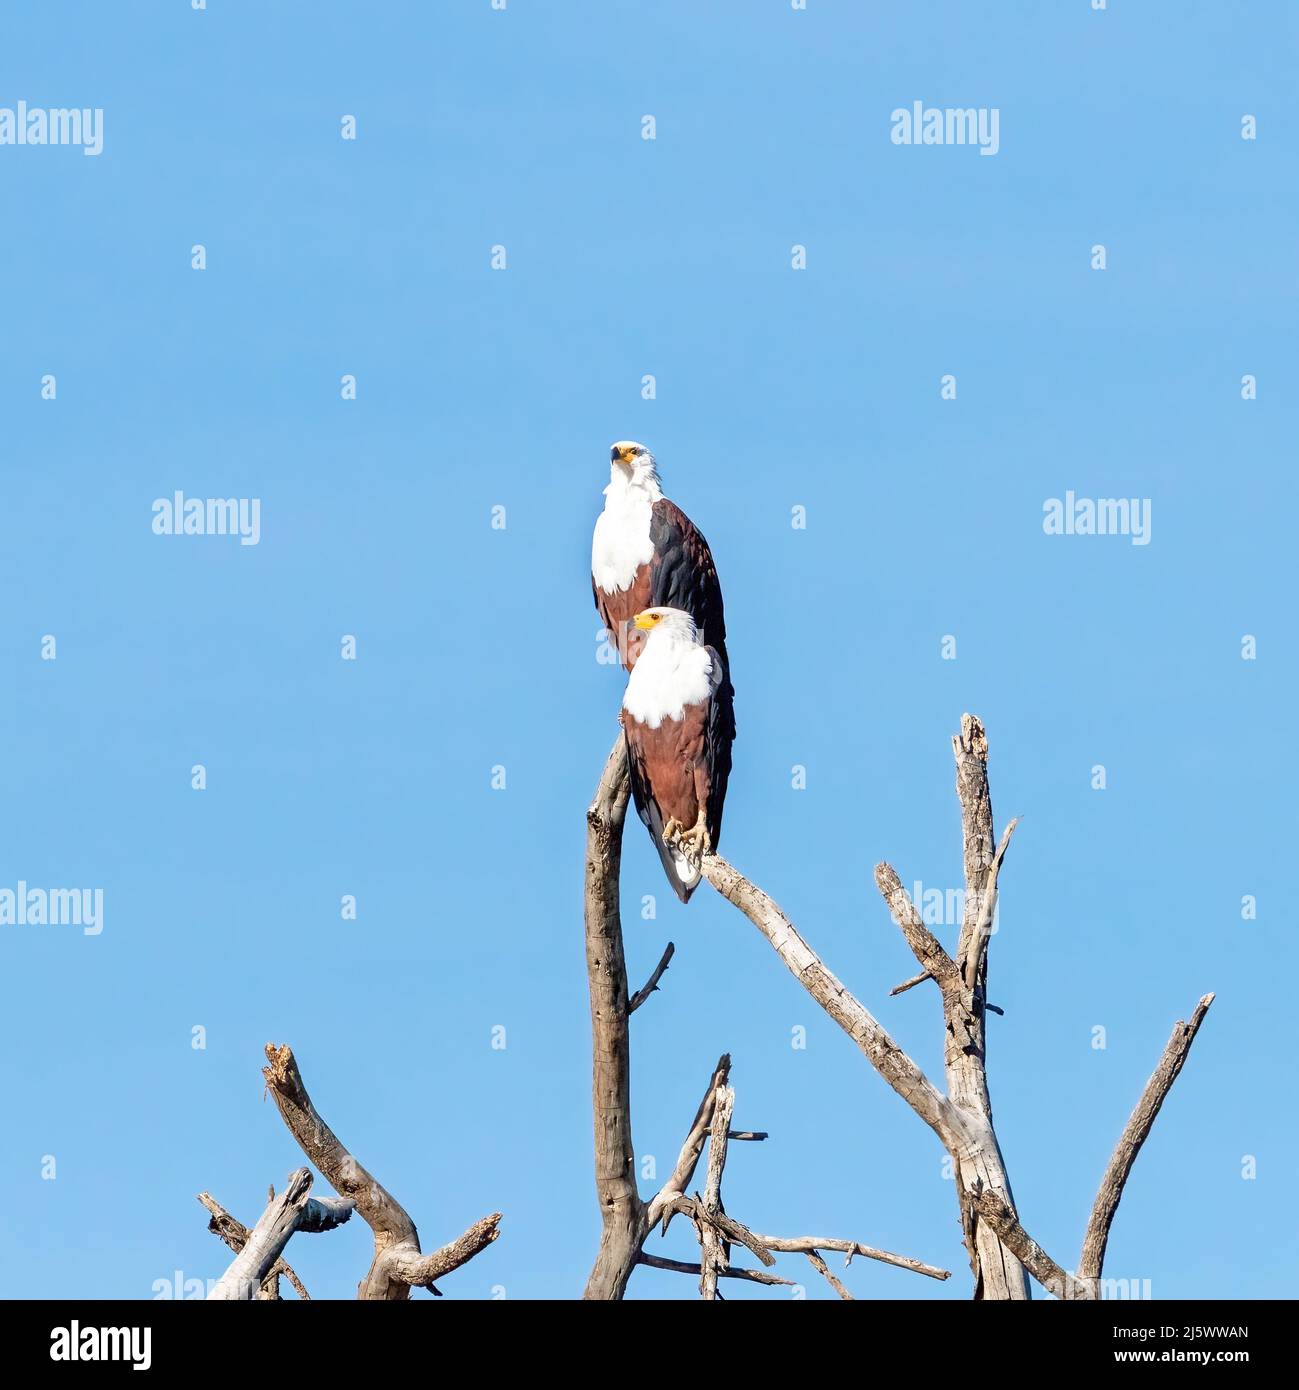 African Fish Eagles perched on a dead tree against blue sky background, in Lake Naivasha, Kenya. A freshwater bird found through sub-Saharan Africa. Stock Photo